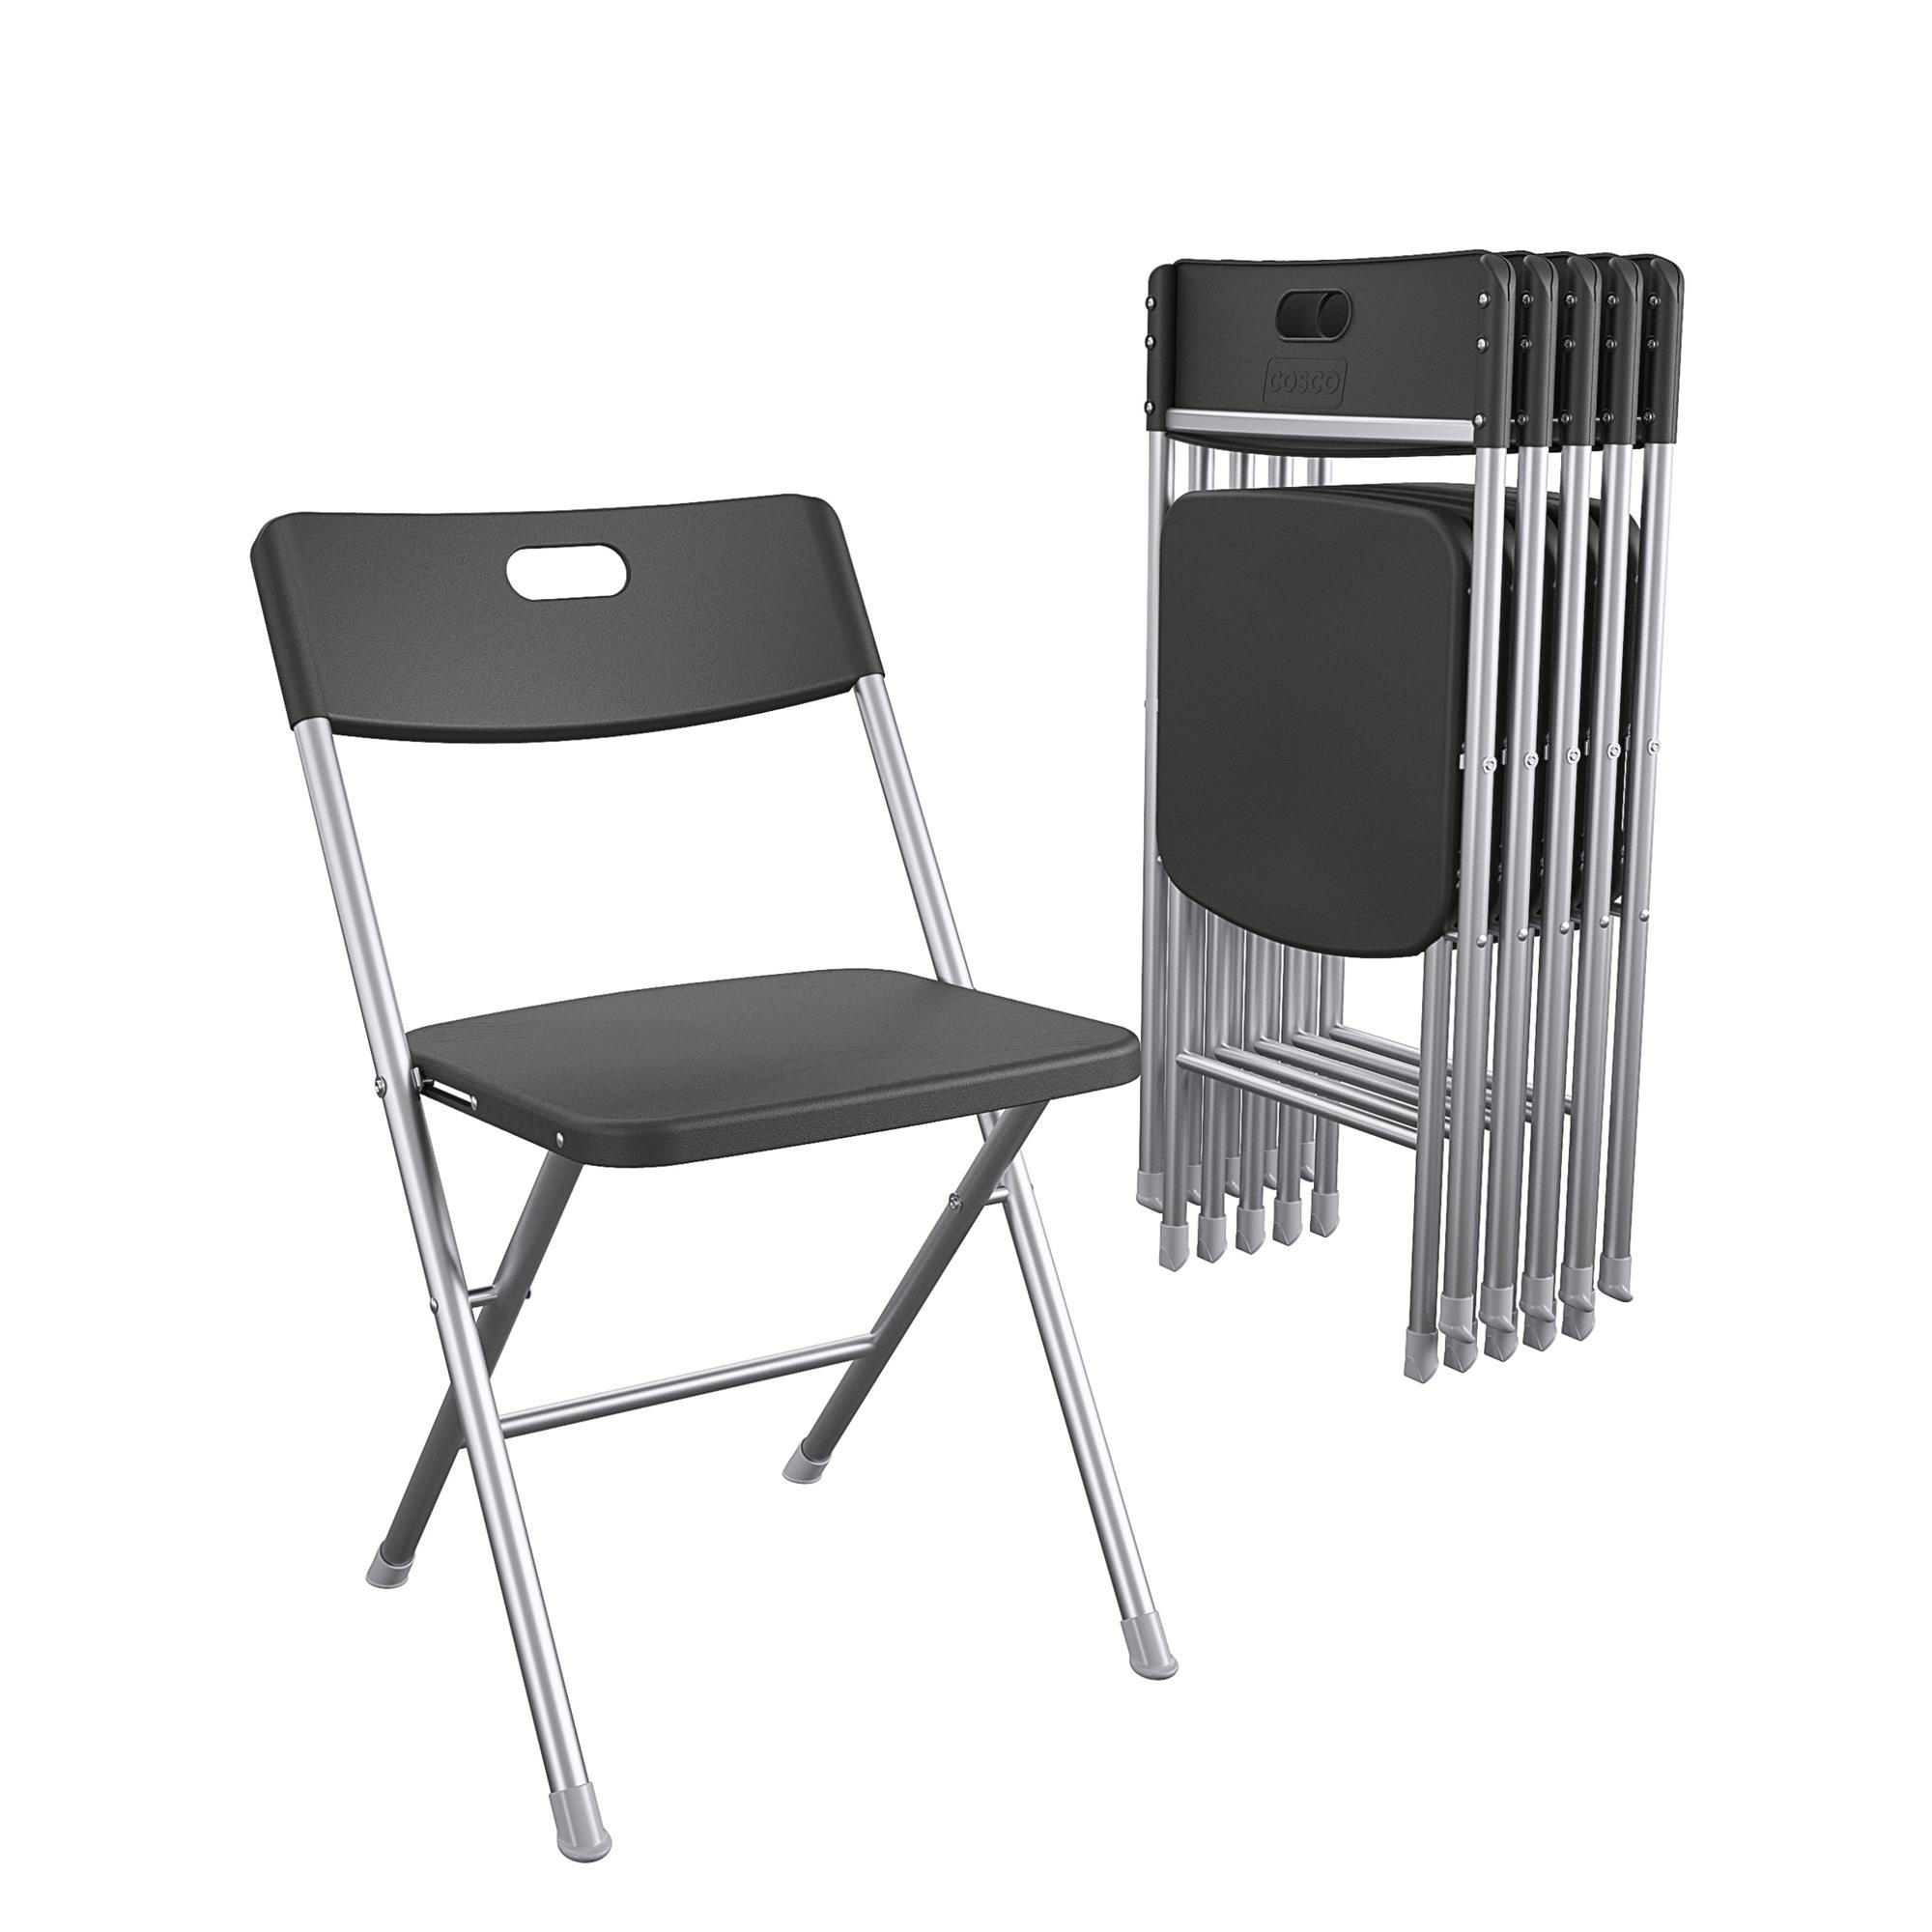 Mainstays Resin Seat & Back Folding Chair, Black - image 2 of 7